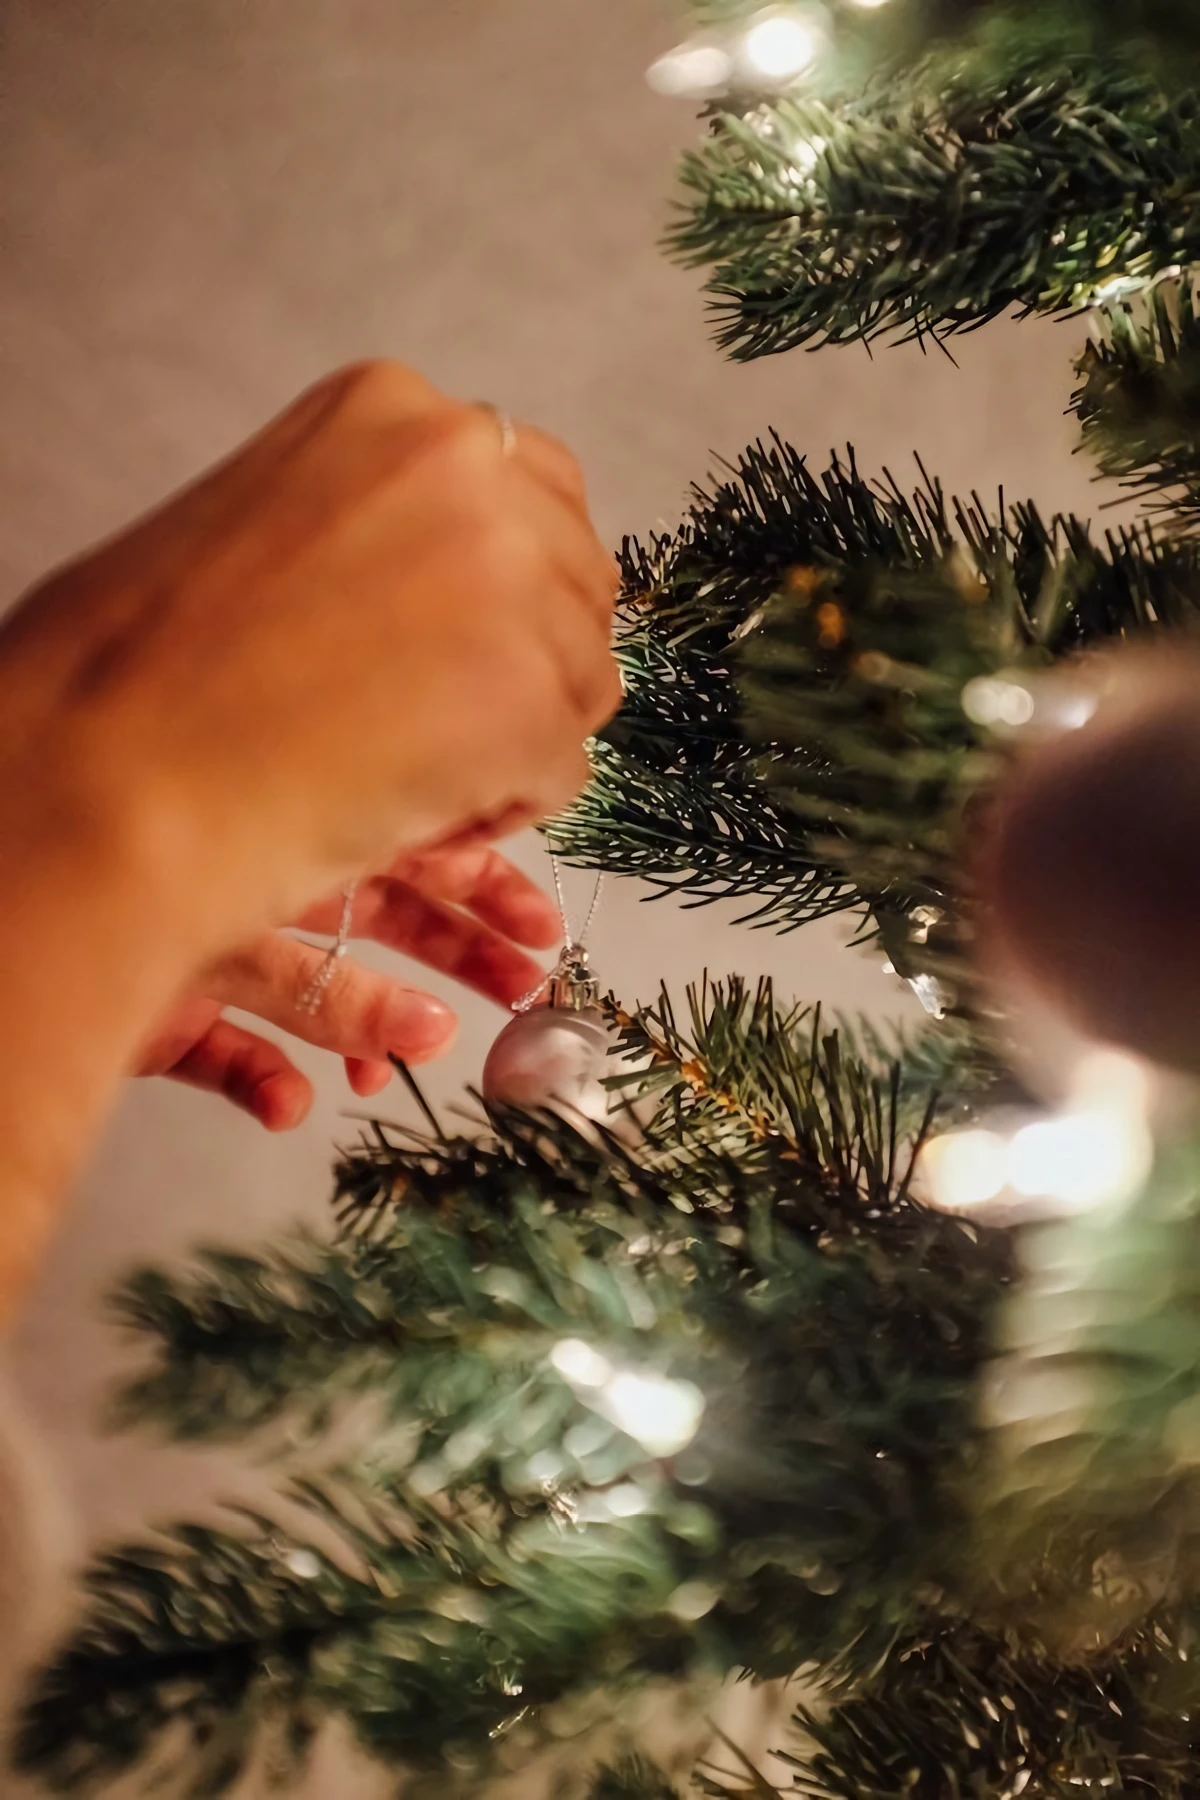 woman putting an ornament on tree